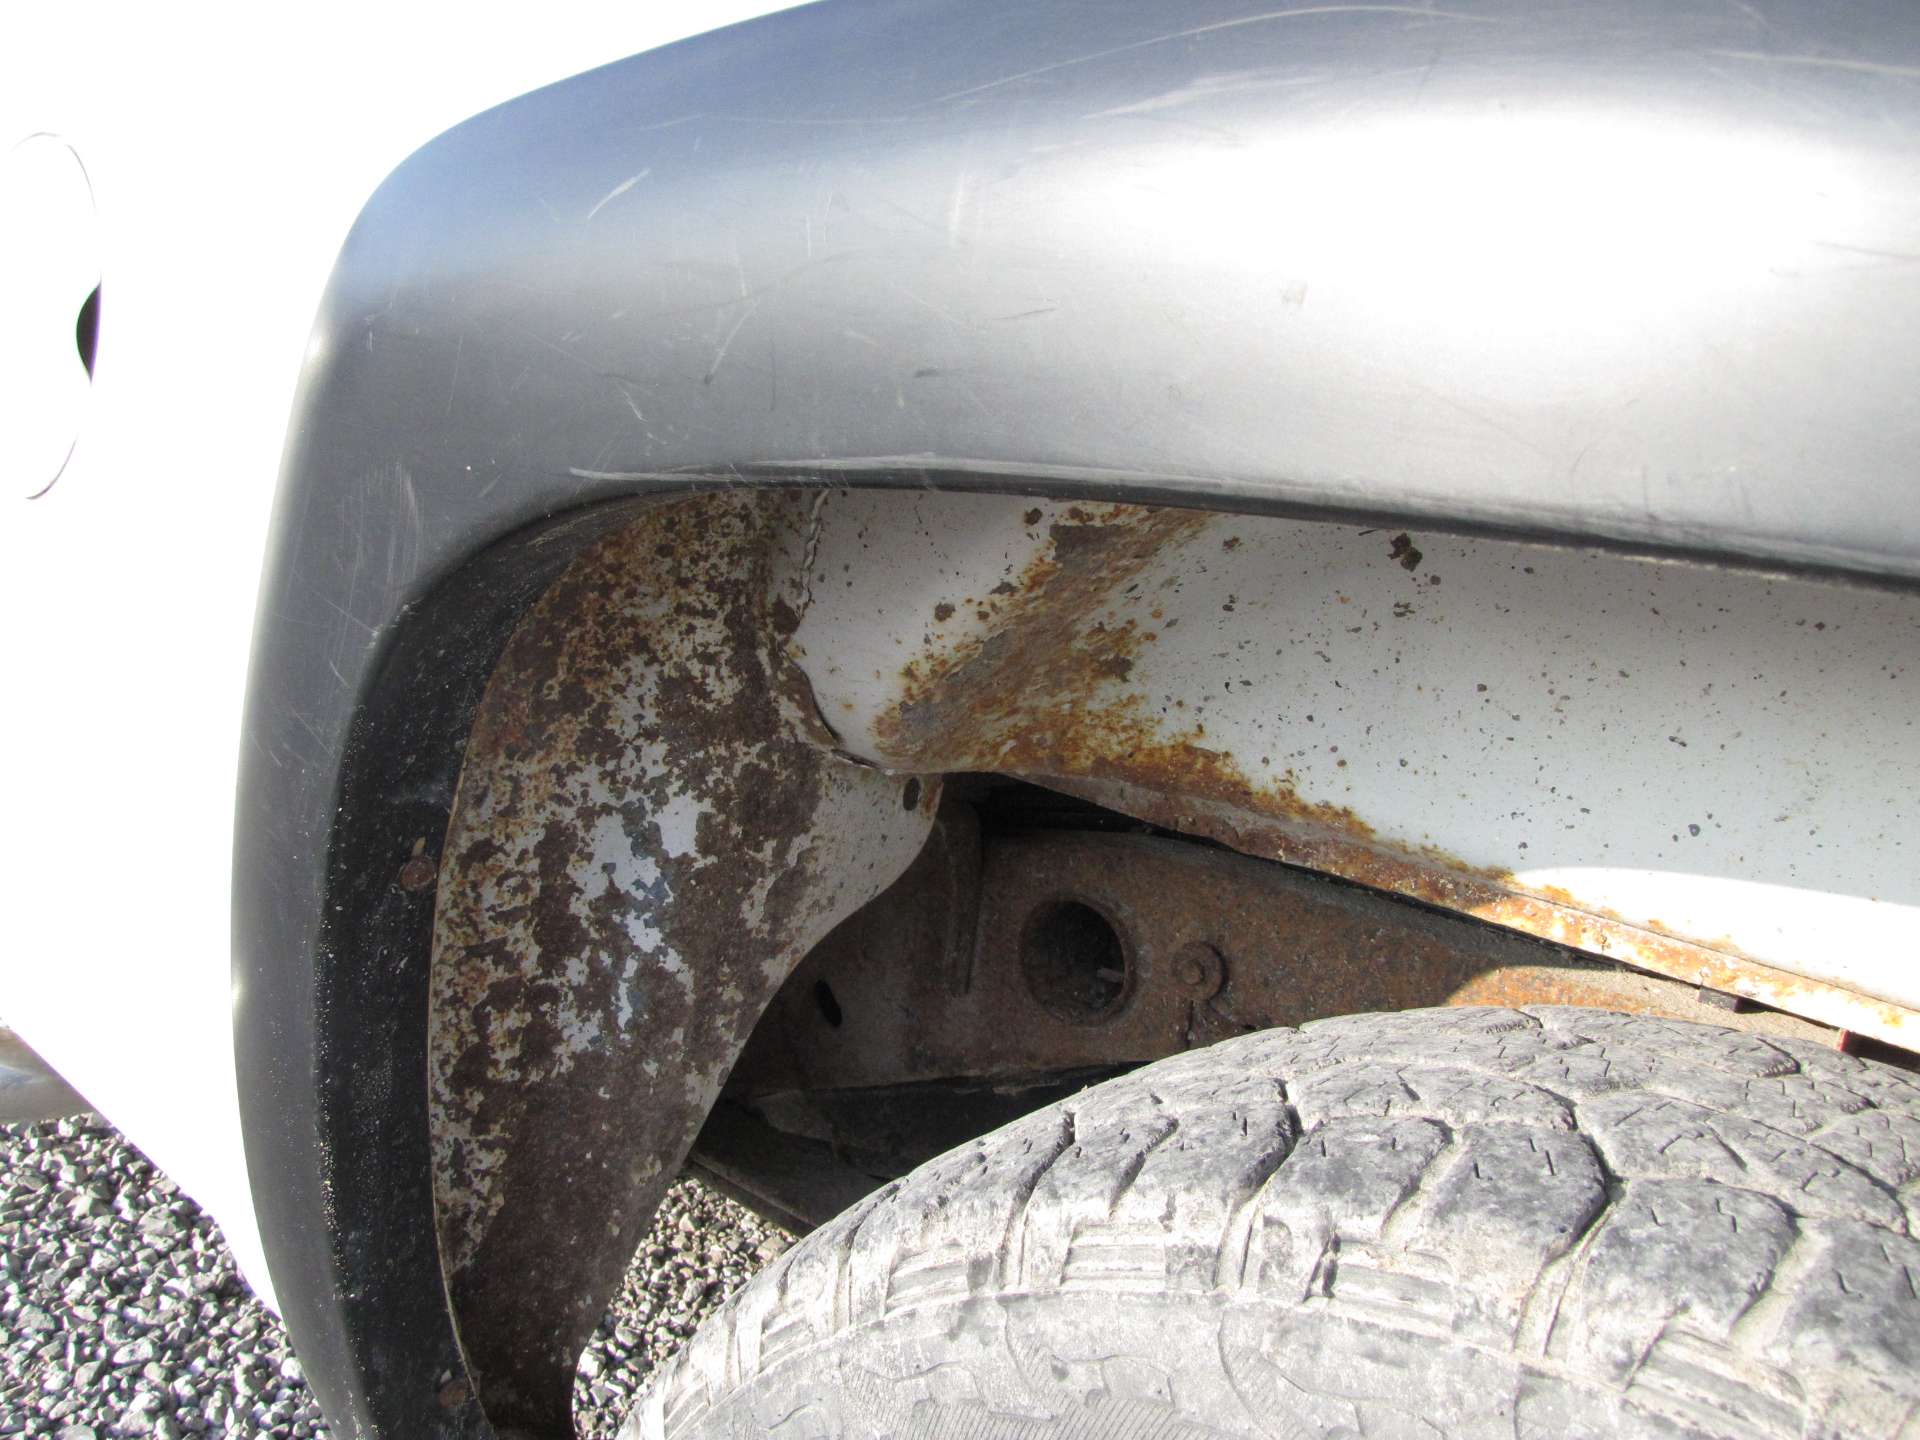 2008 Chevy Silverado 1500 LT Pickup Truck (CRACKED FRAME) - Image 21 of 43